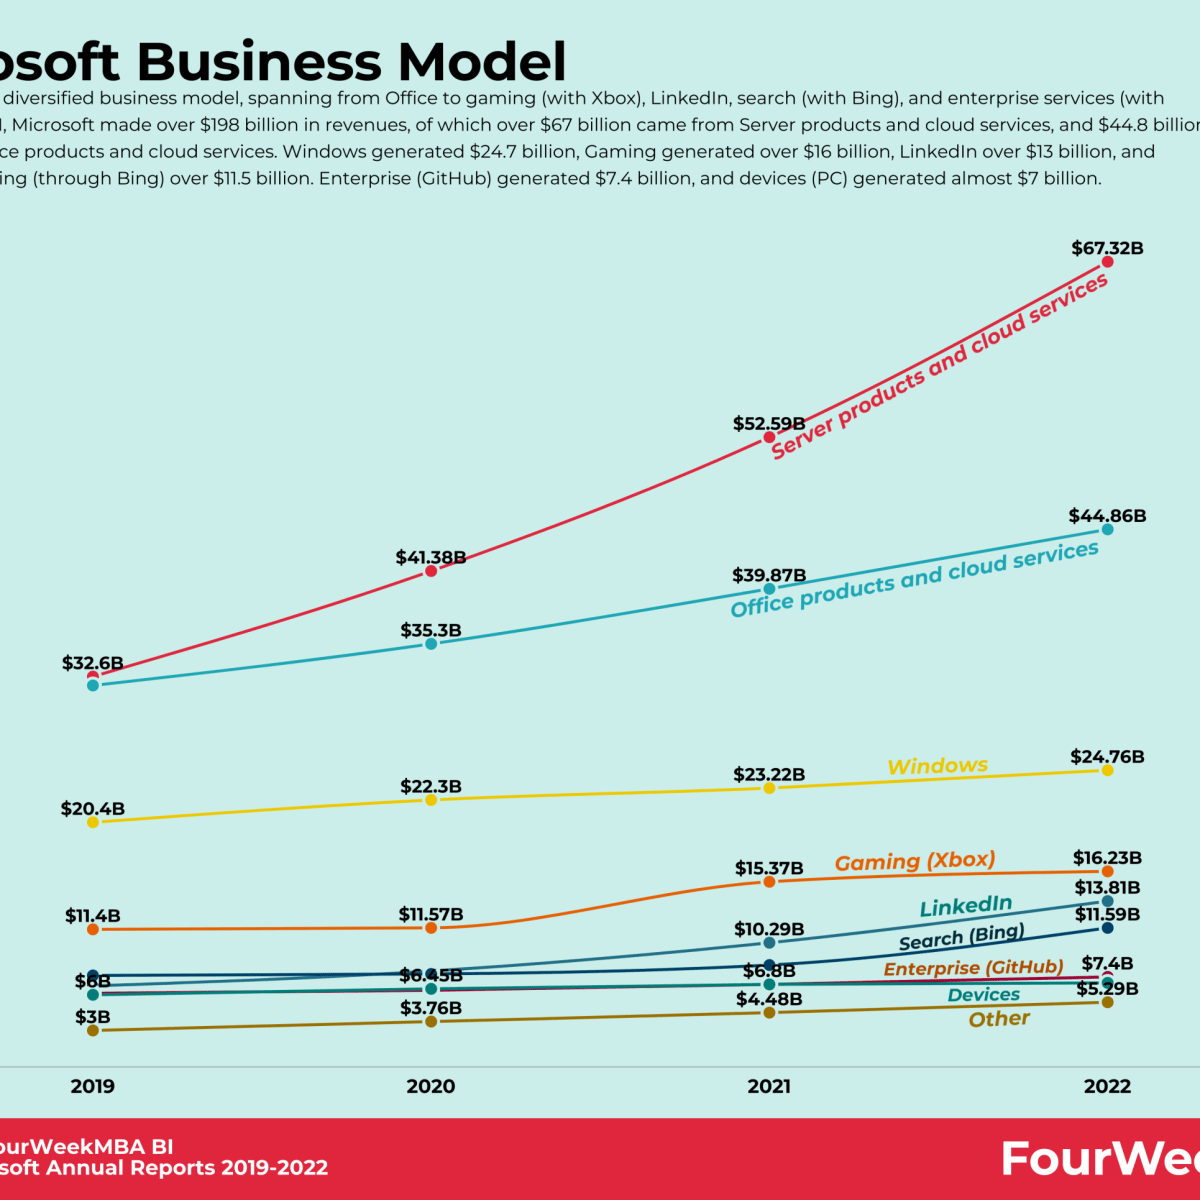 Microsoft Subsidiaries: The List Of Companies Owned By Microsoft -  FourWeekMBA